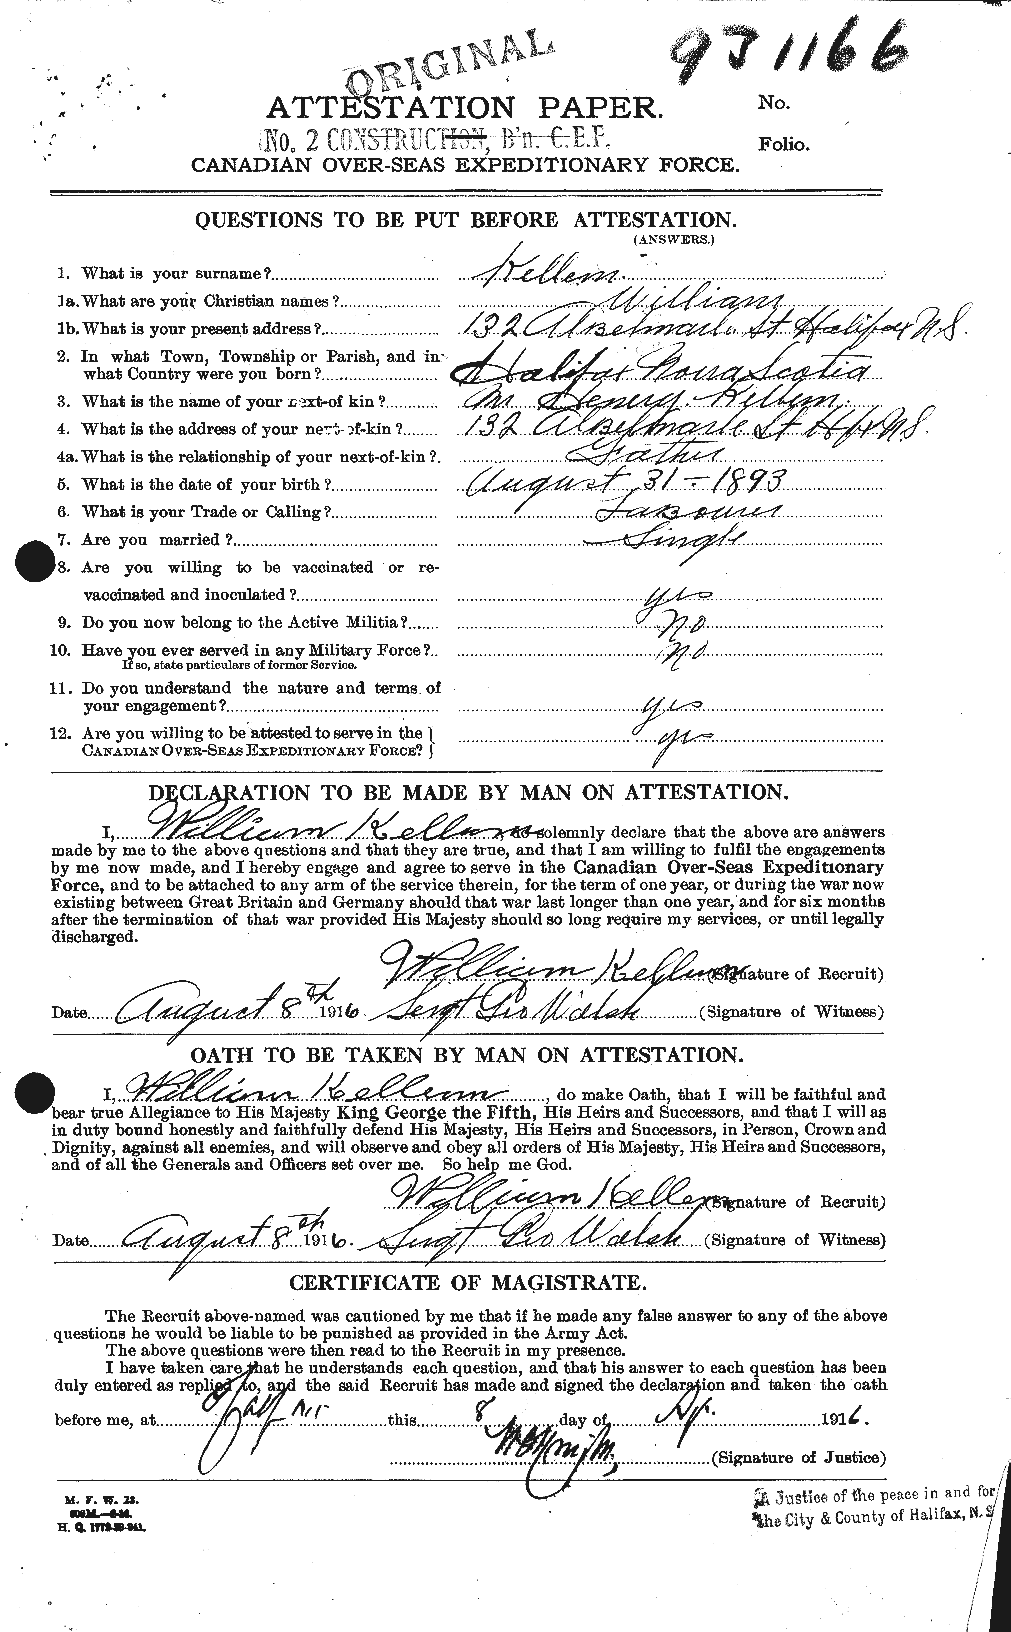 Personnel Records of the First World War - CEF 434168a